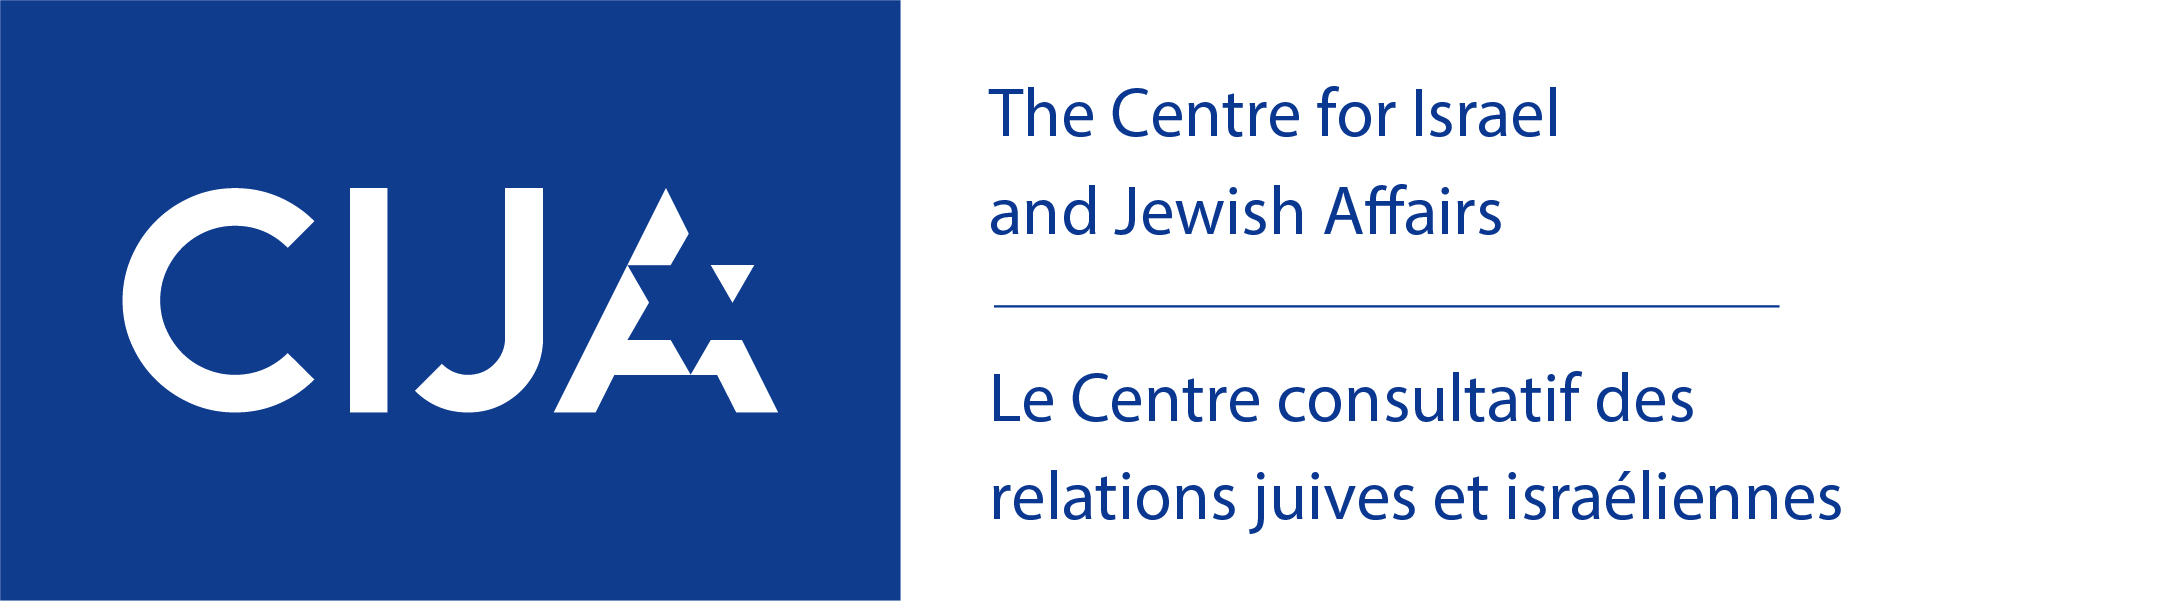 The Centre for Israel and Jewish Affairs